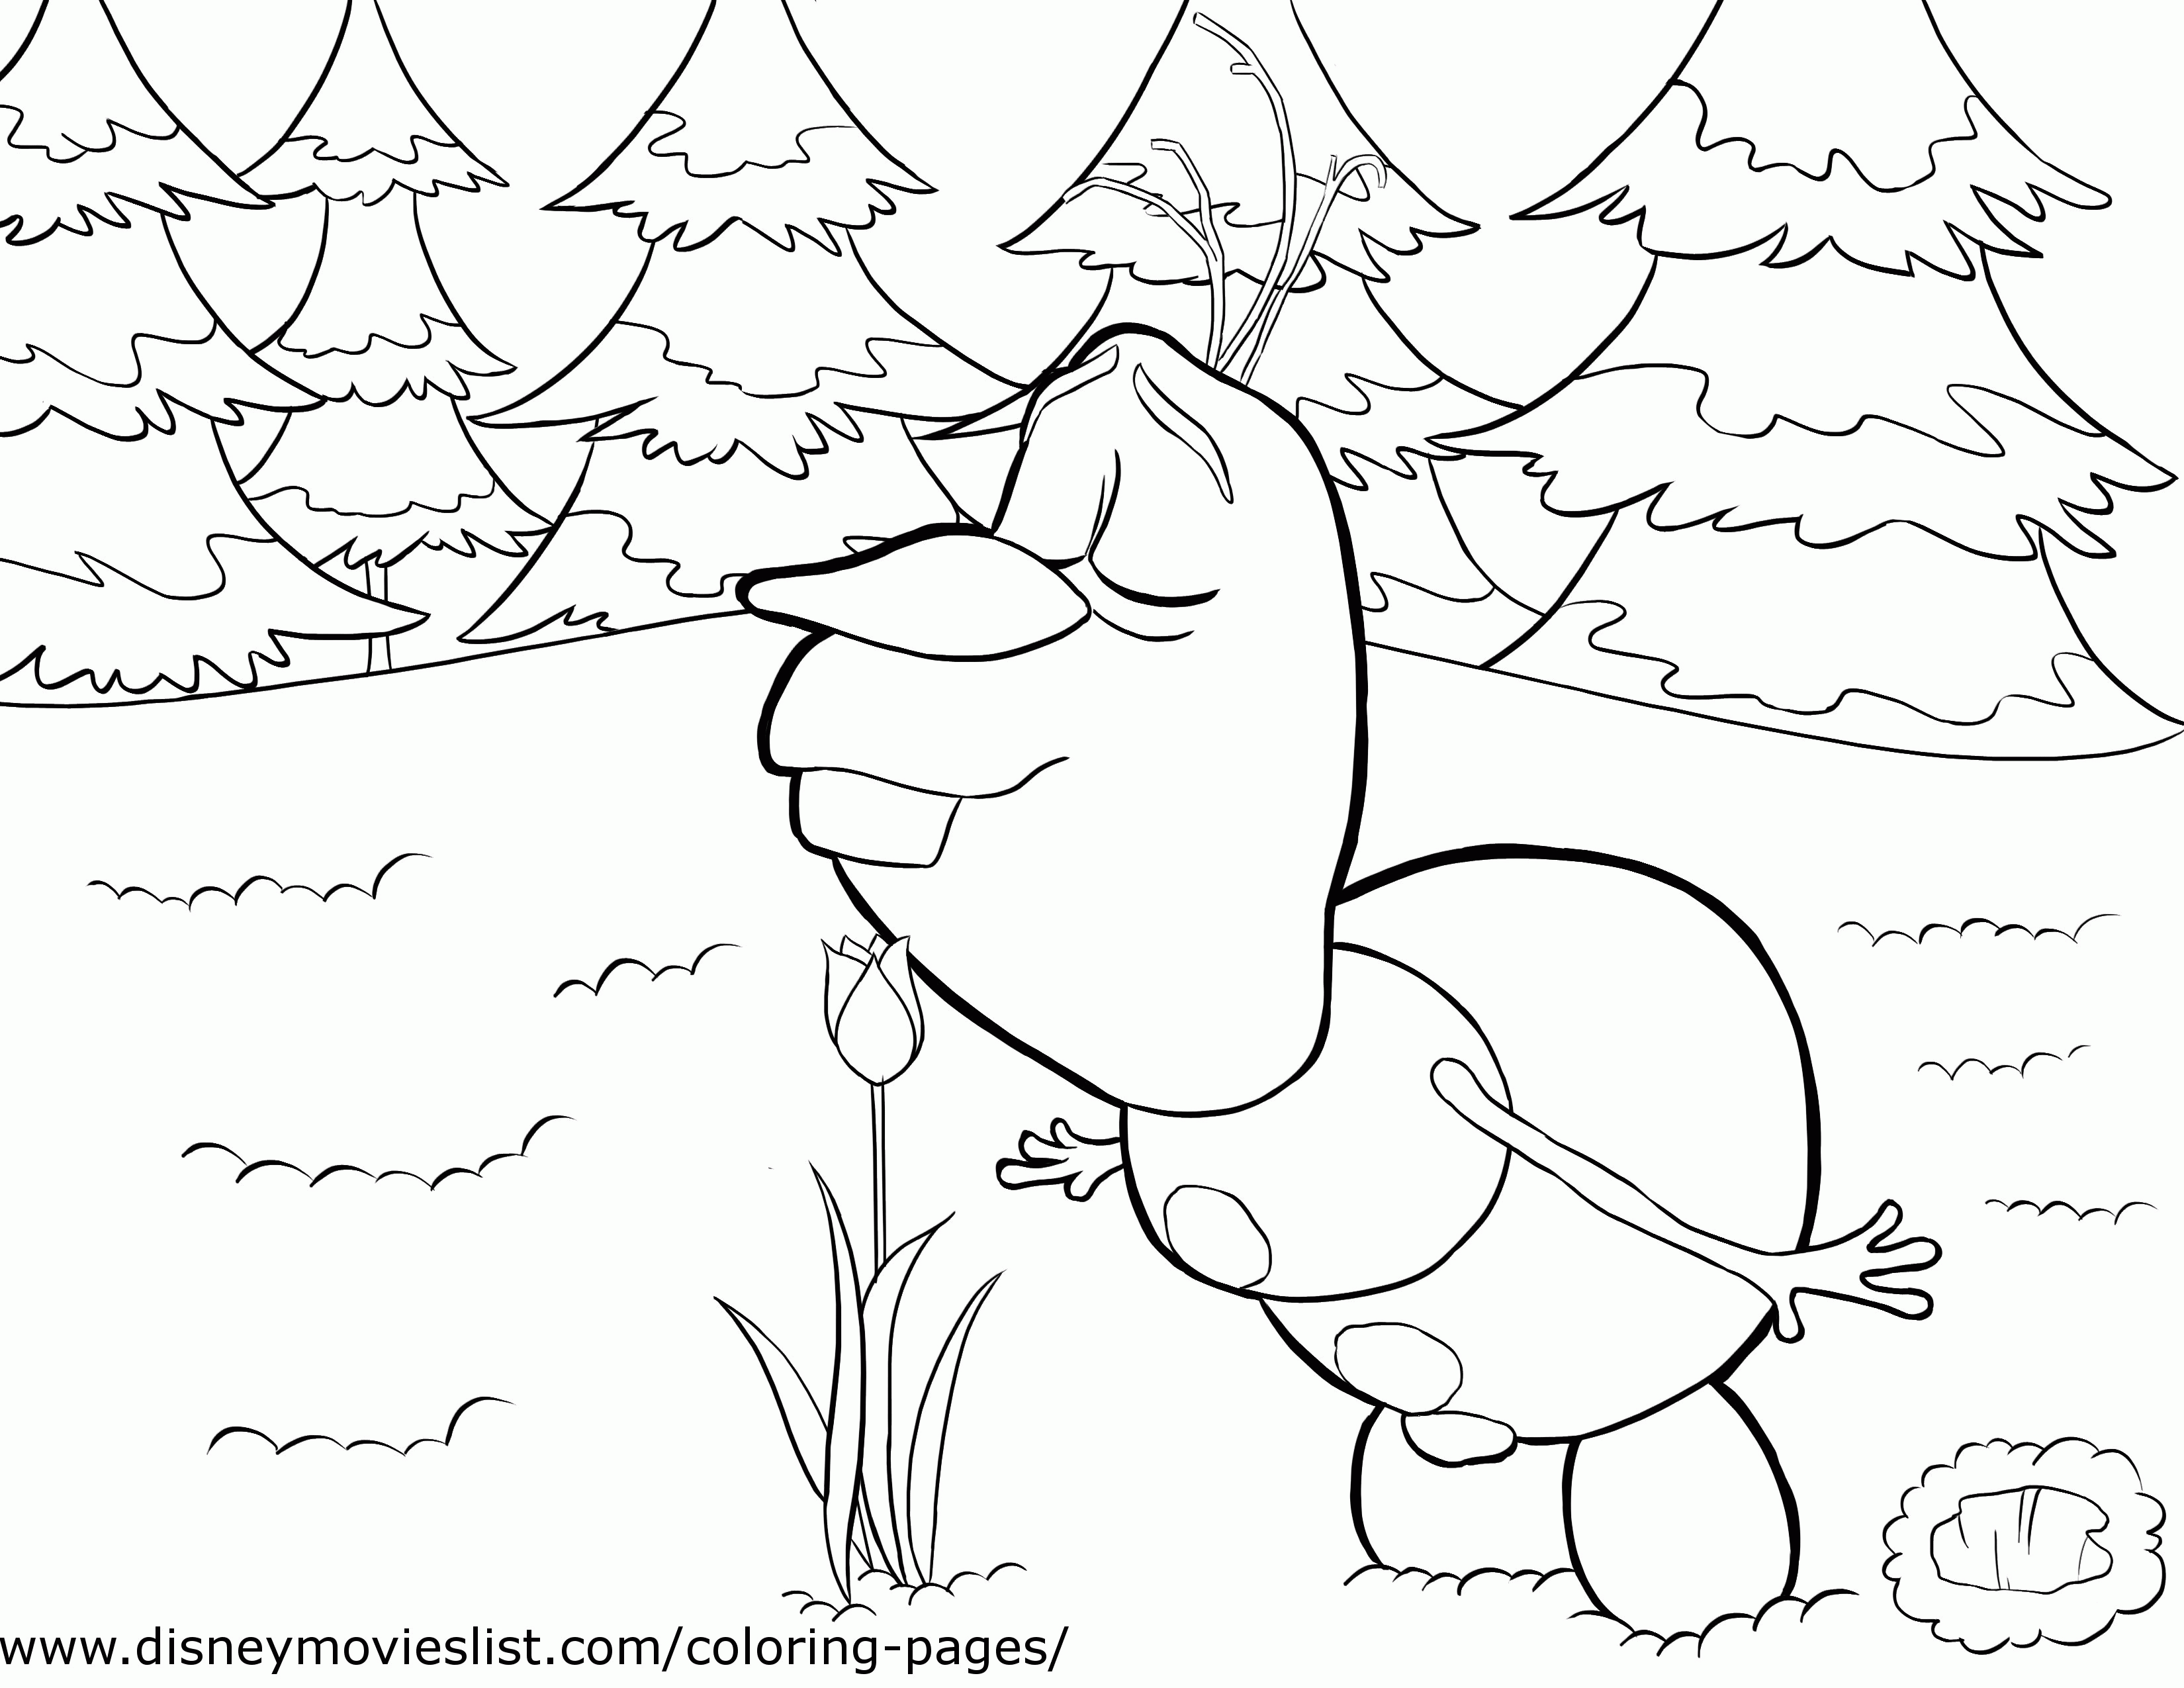 Frozen 2 Cool Coloring Page